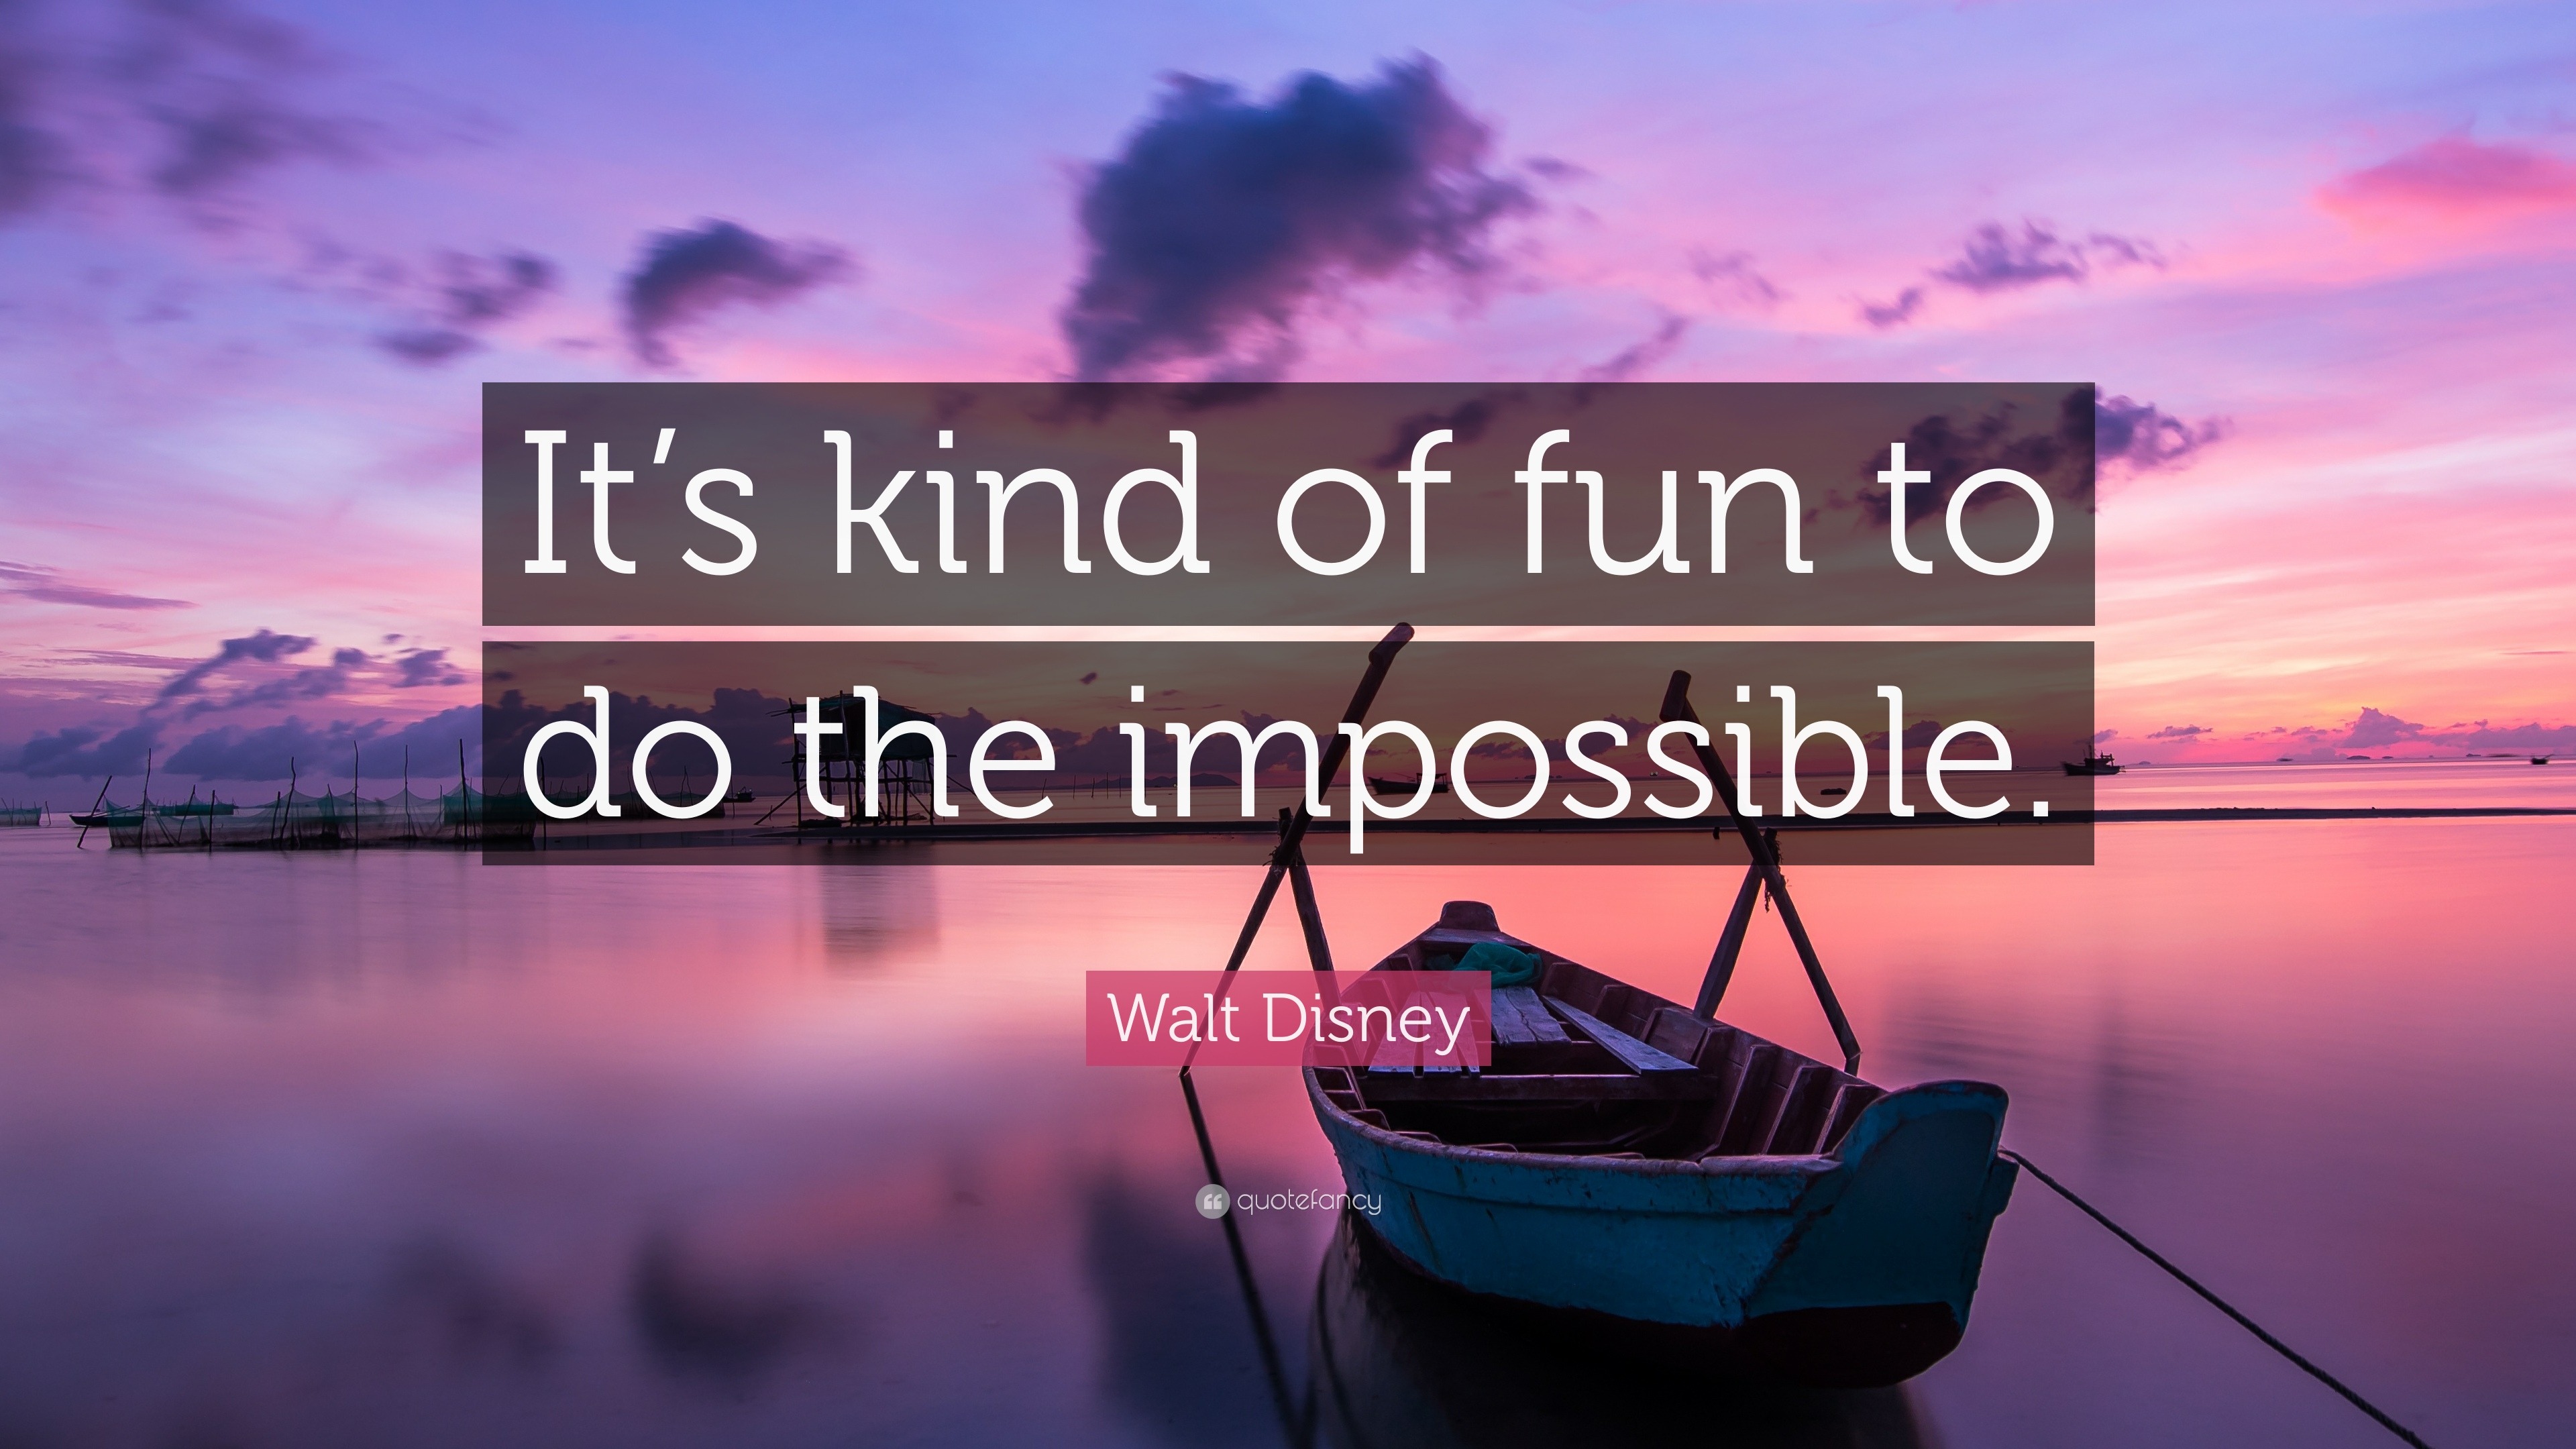 Walt Disney Quote: "It's kind of fun to do the impossible ...